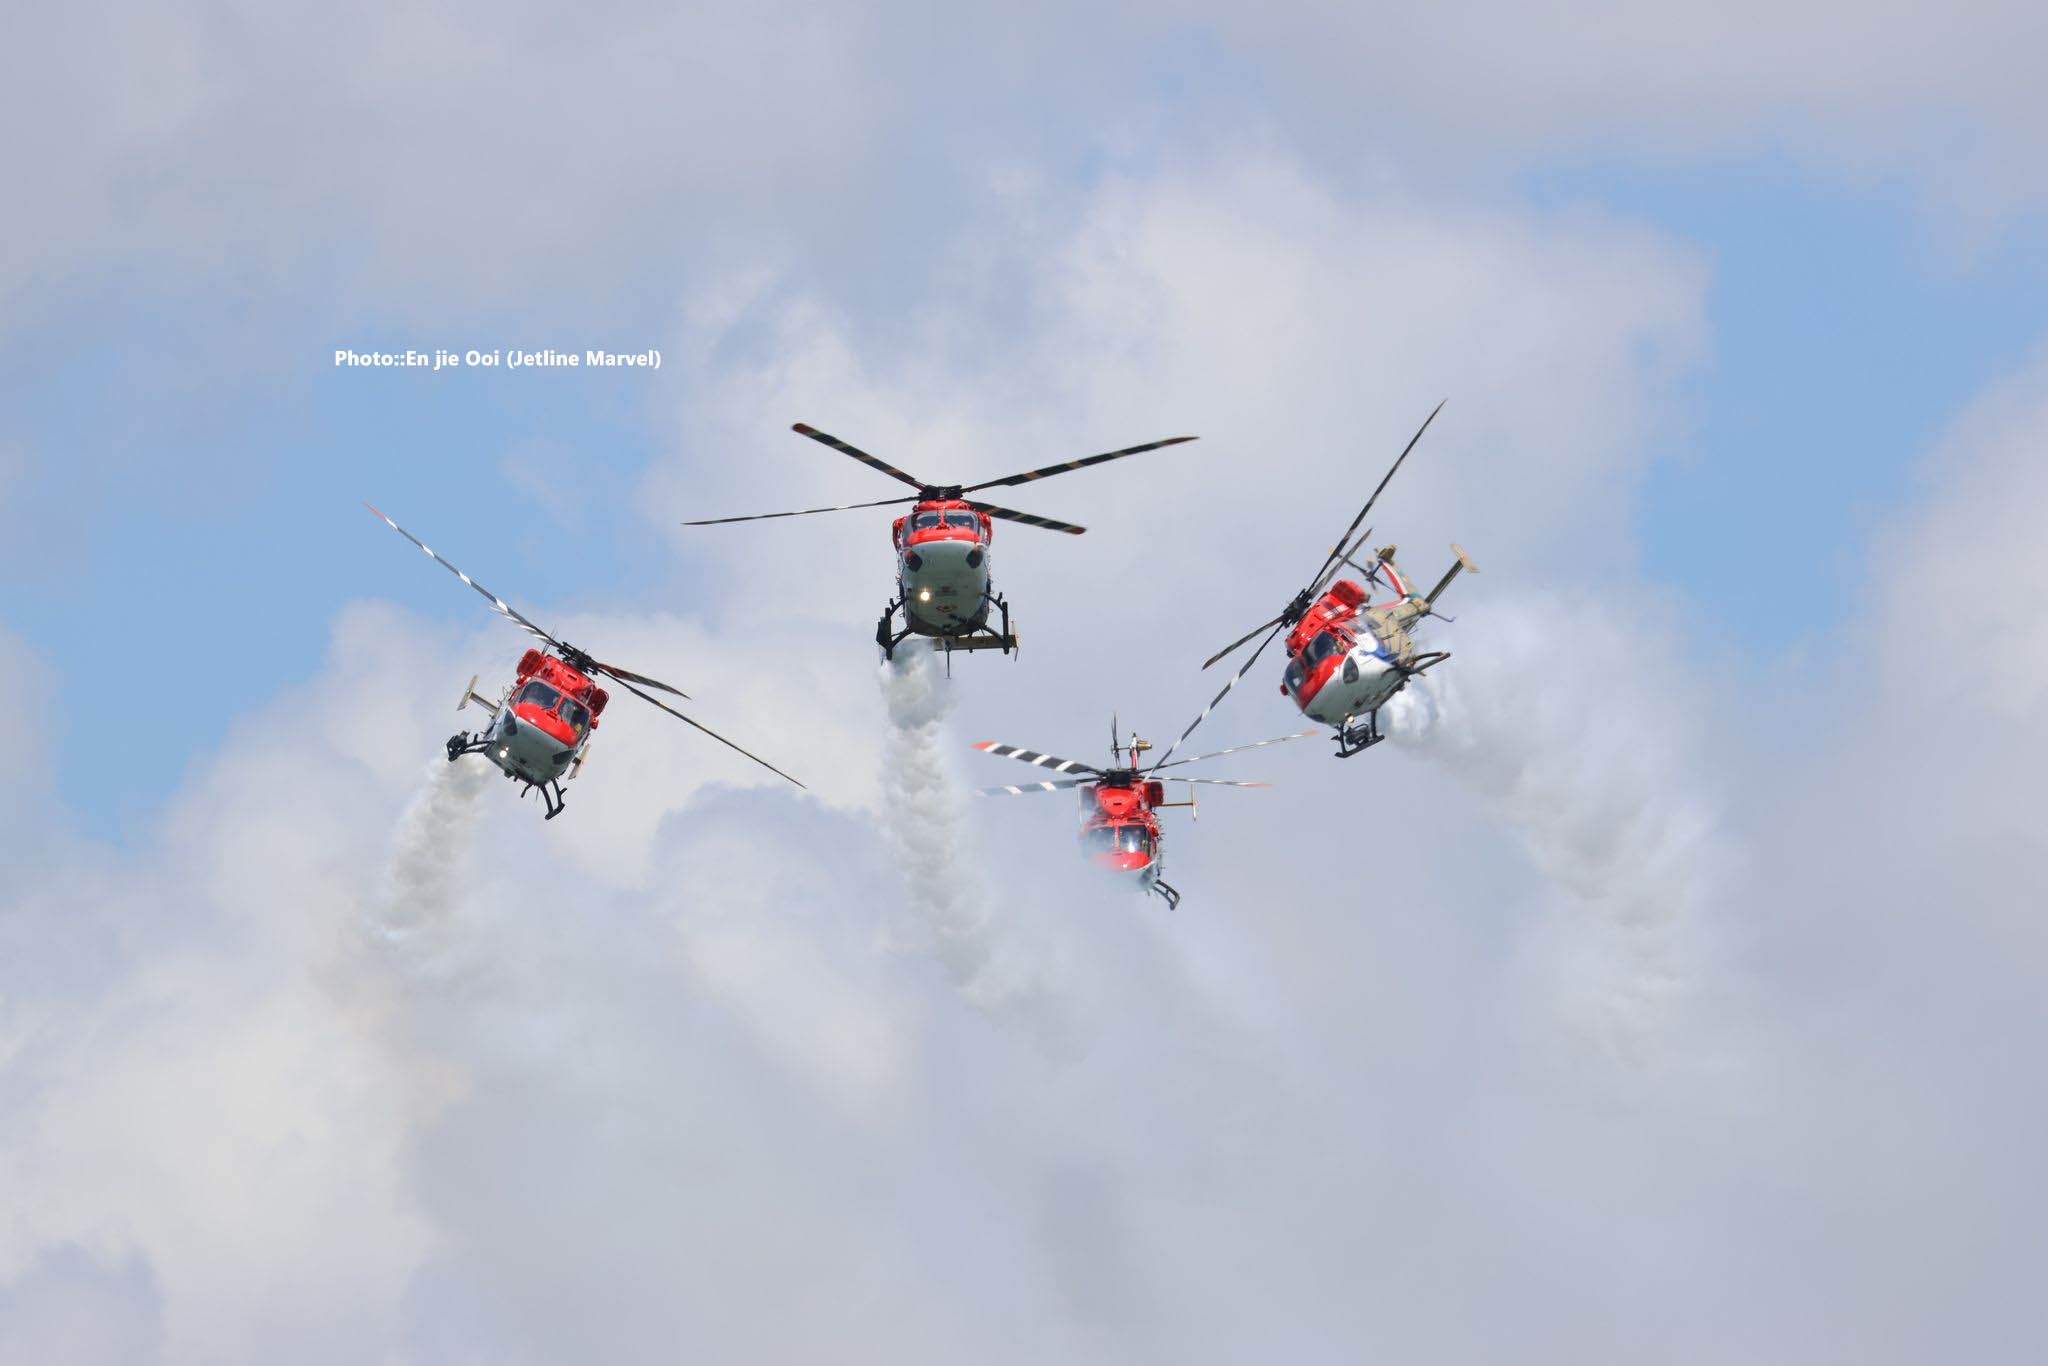 Exclusive Interview with the IAF Sarang Display Team at the Singapore Airshow by Jetline Marvel